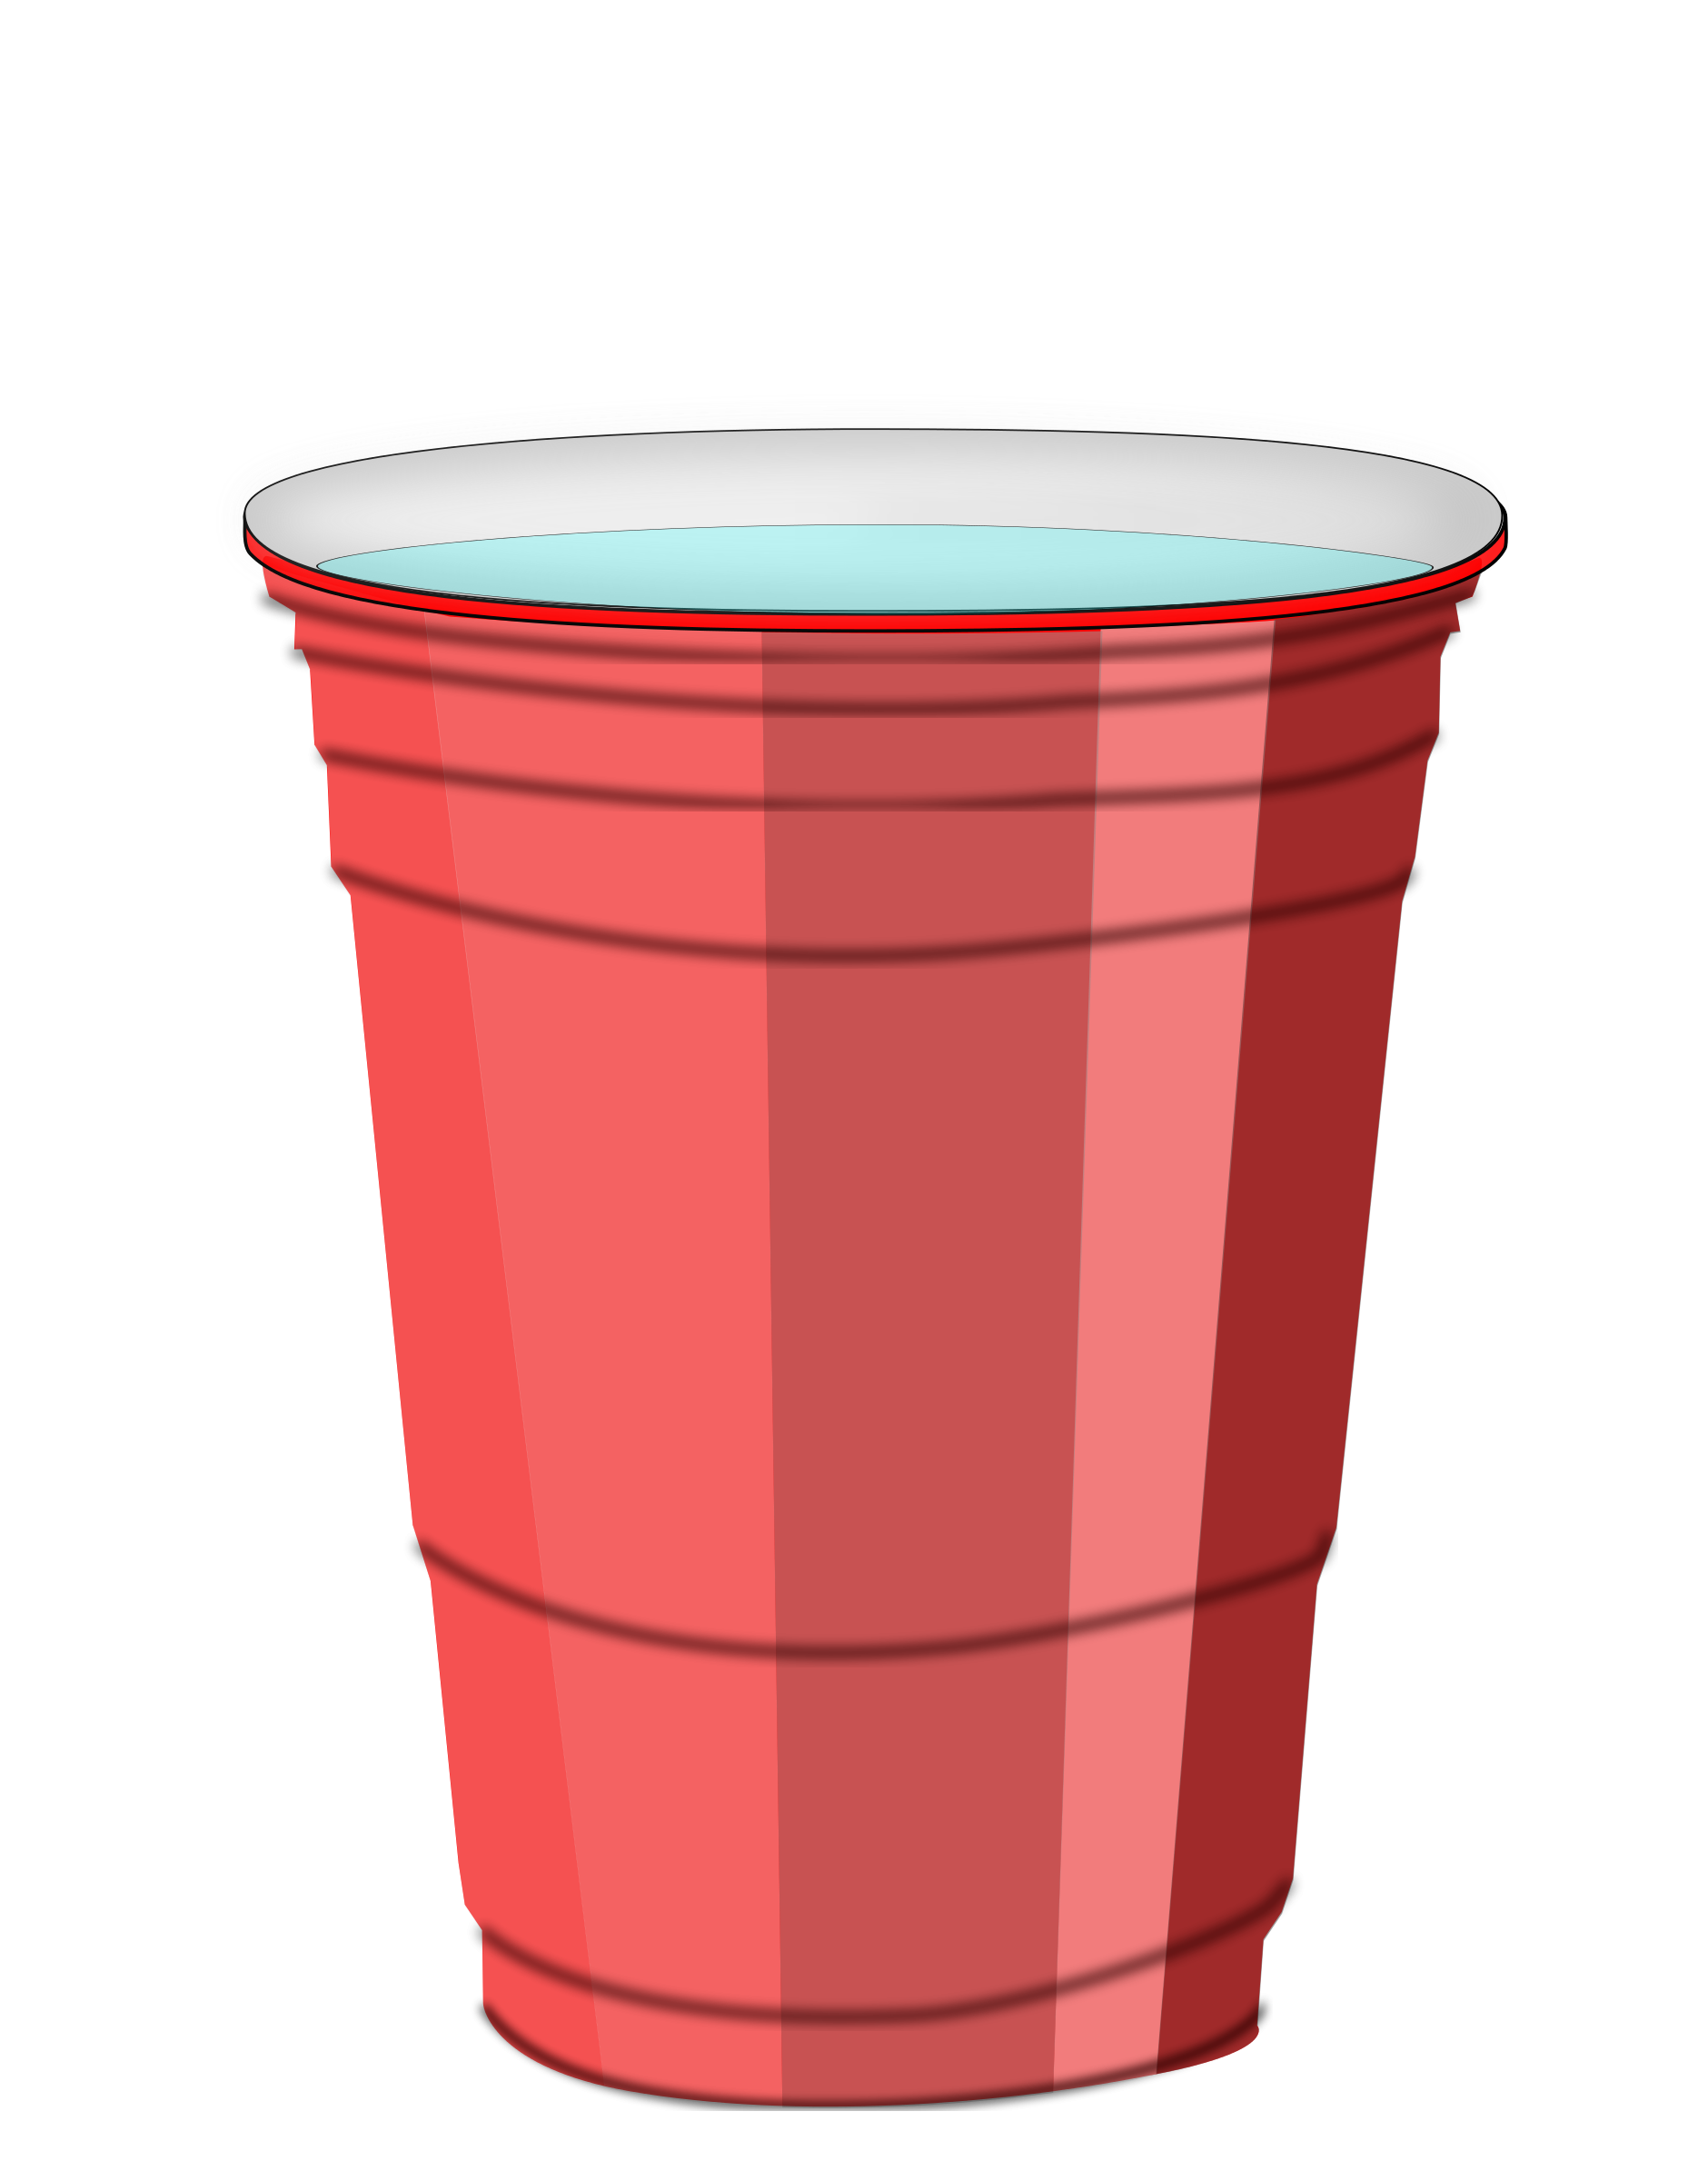 Styrofoam Cup Clipart | Clipart Panda - Free Clipart Images